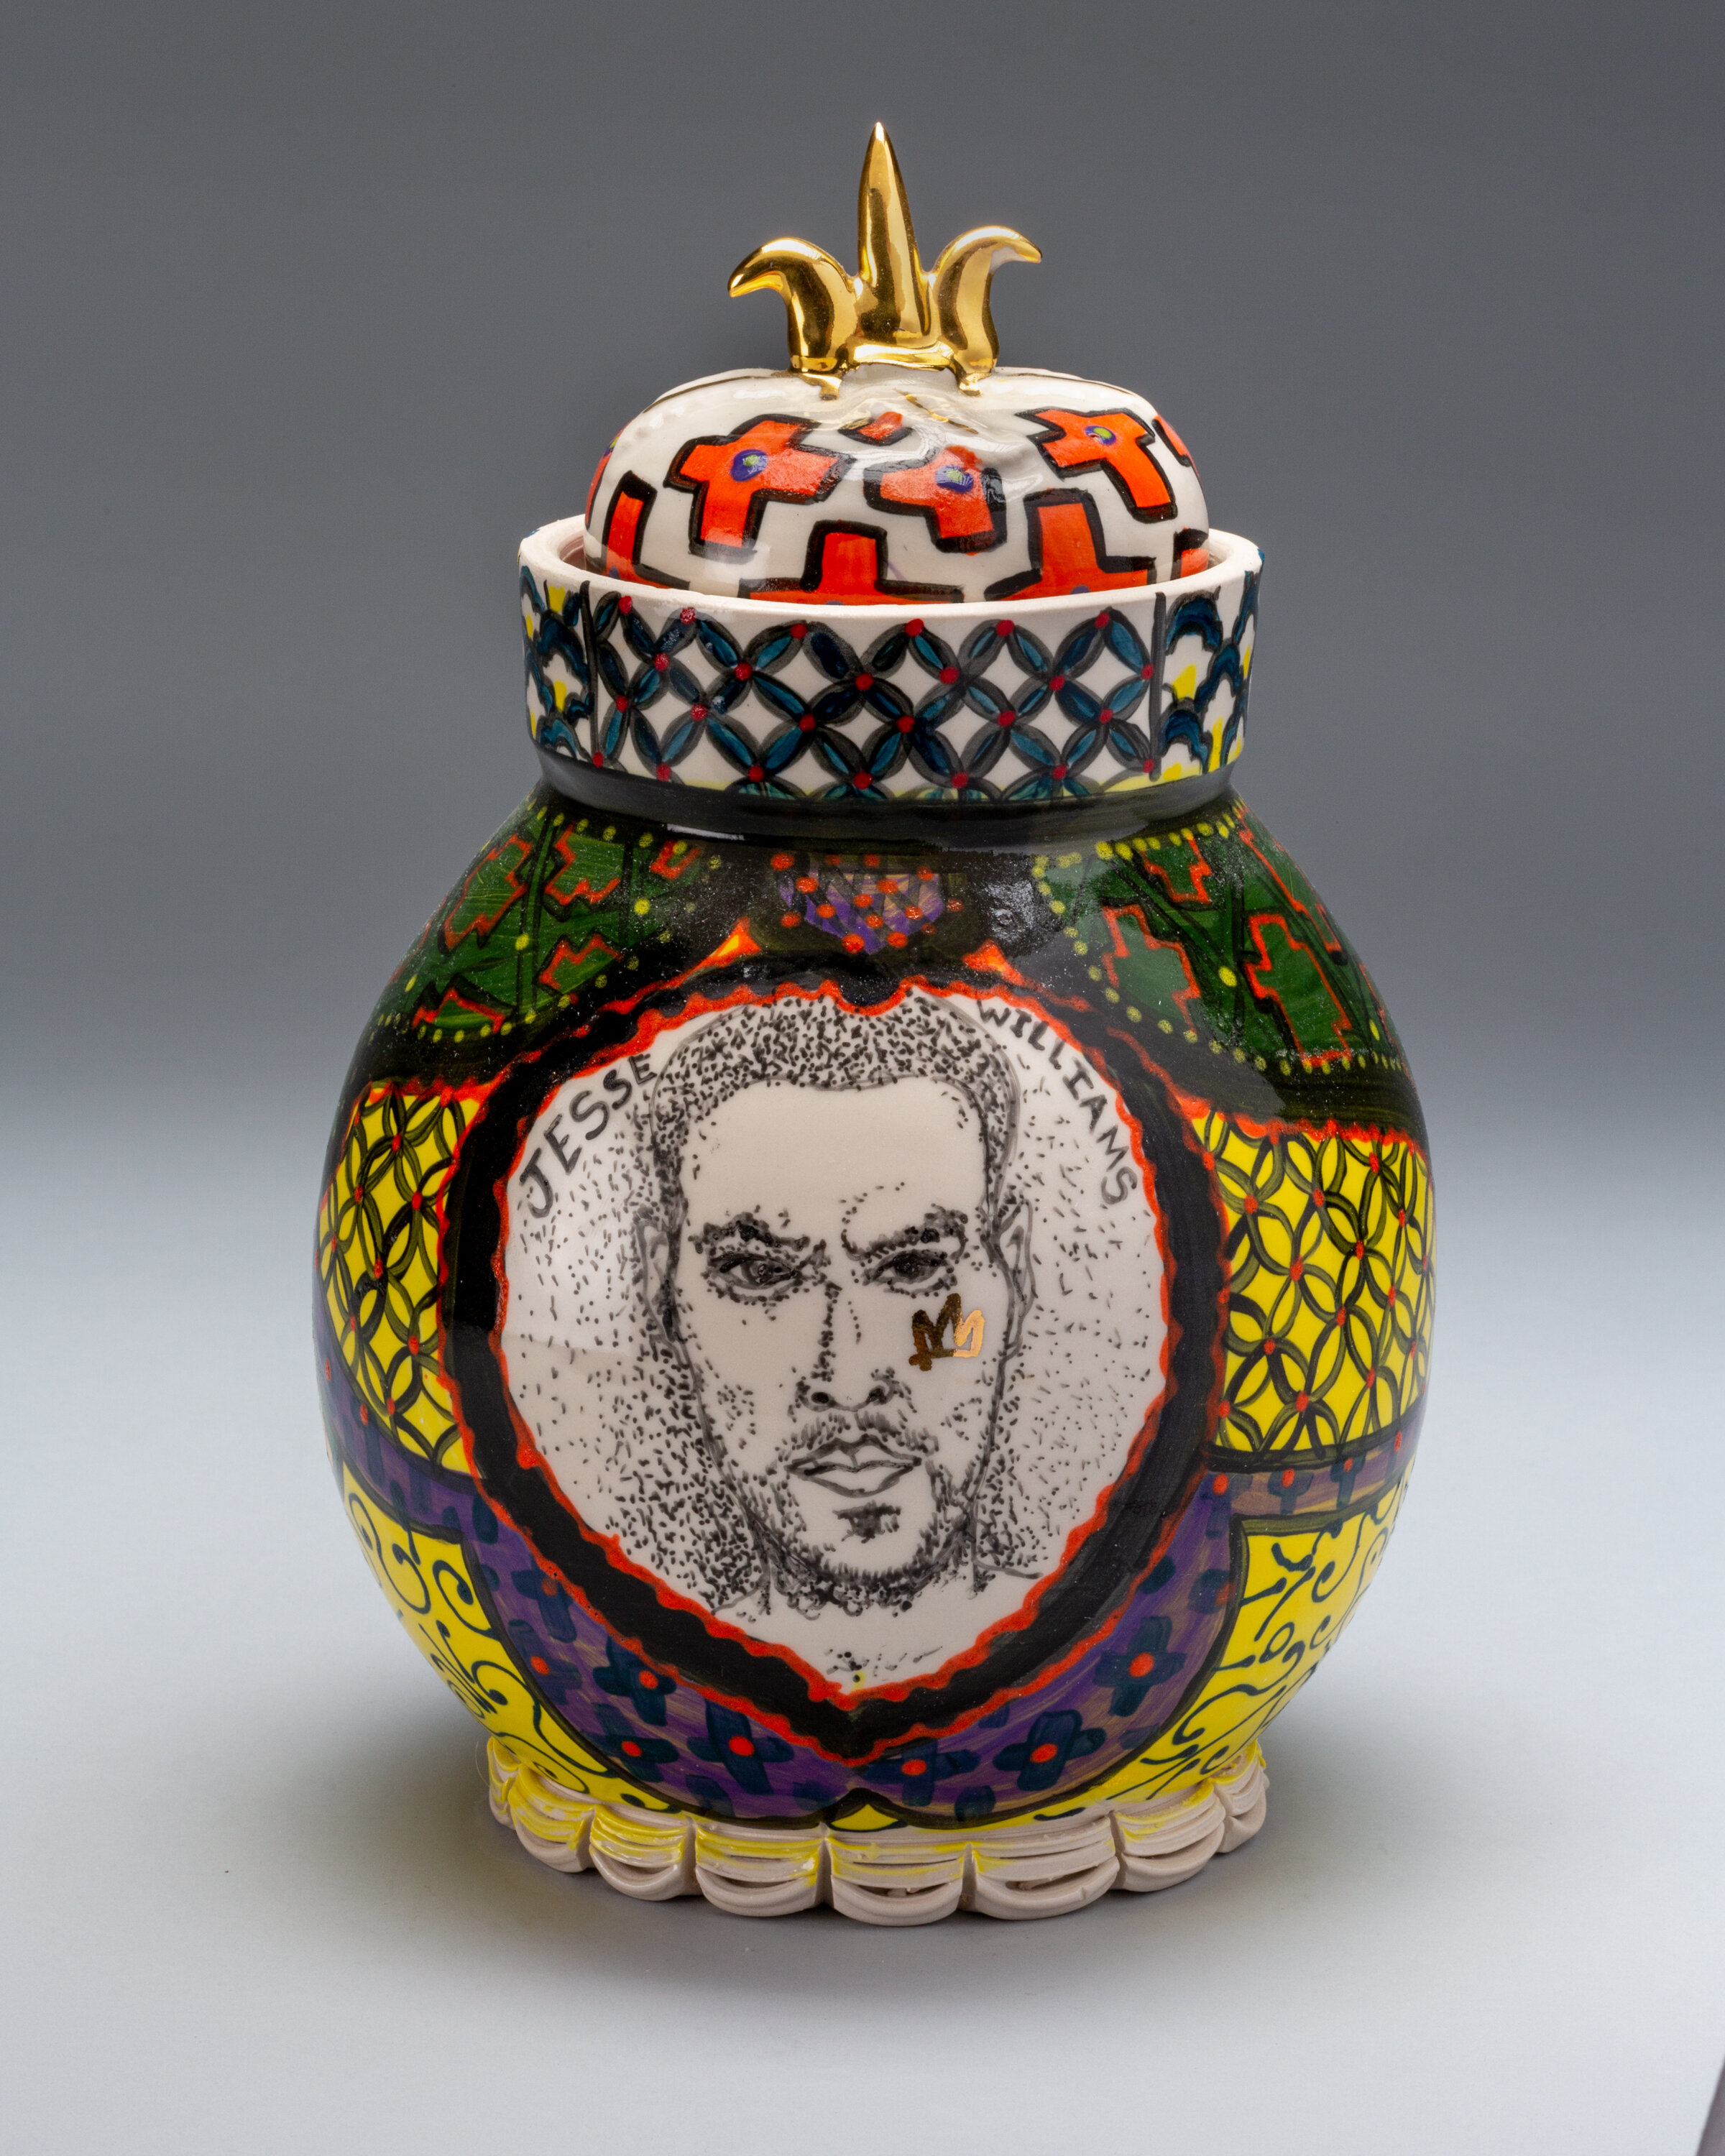   Roberto Lugo ( American, b. 1981),  Covered Jar: Theaster Gates and Jesse Williams Portraits , 2016, Porcelain, 13 x 8 ½ in., Signed on portraits, © Roberto Lugo 